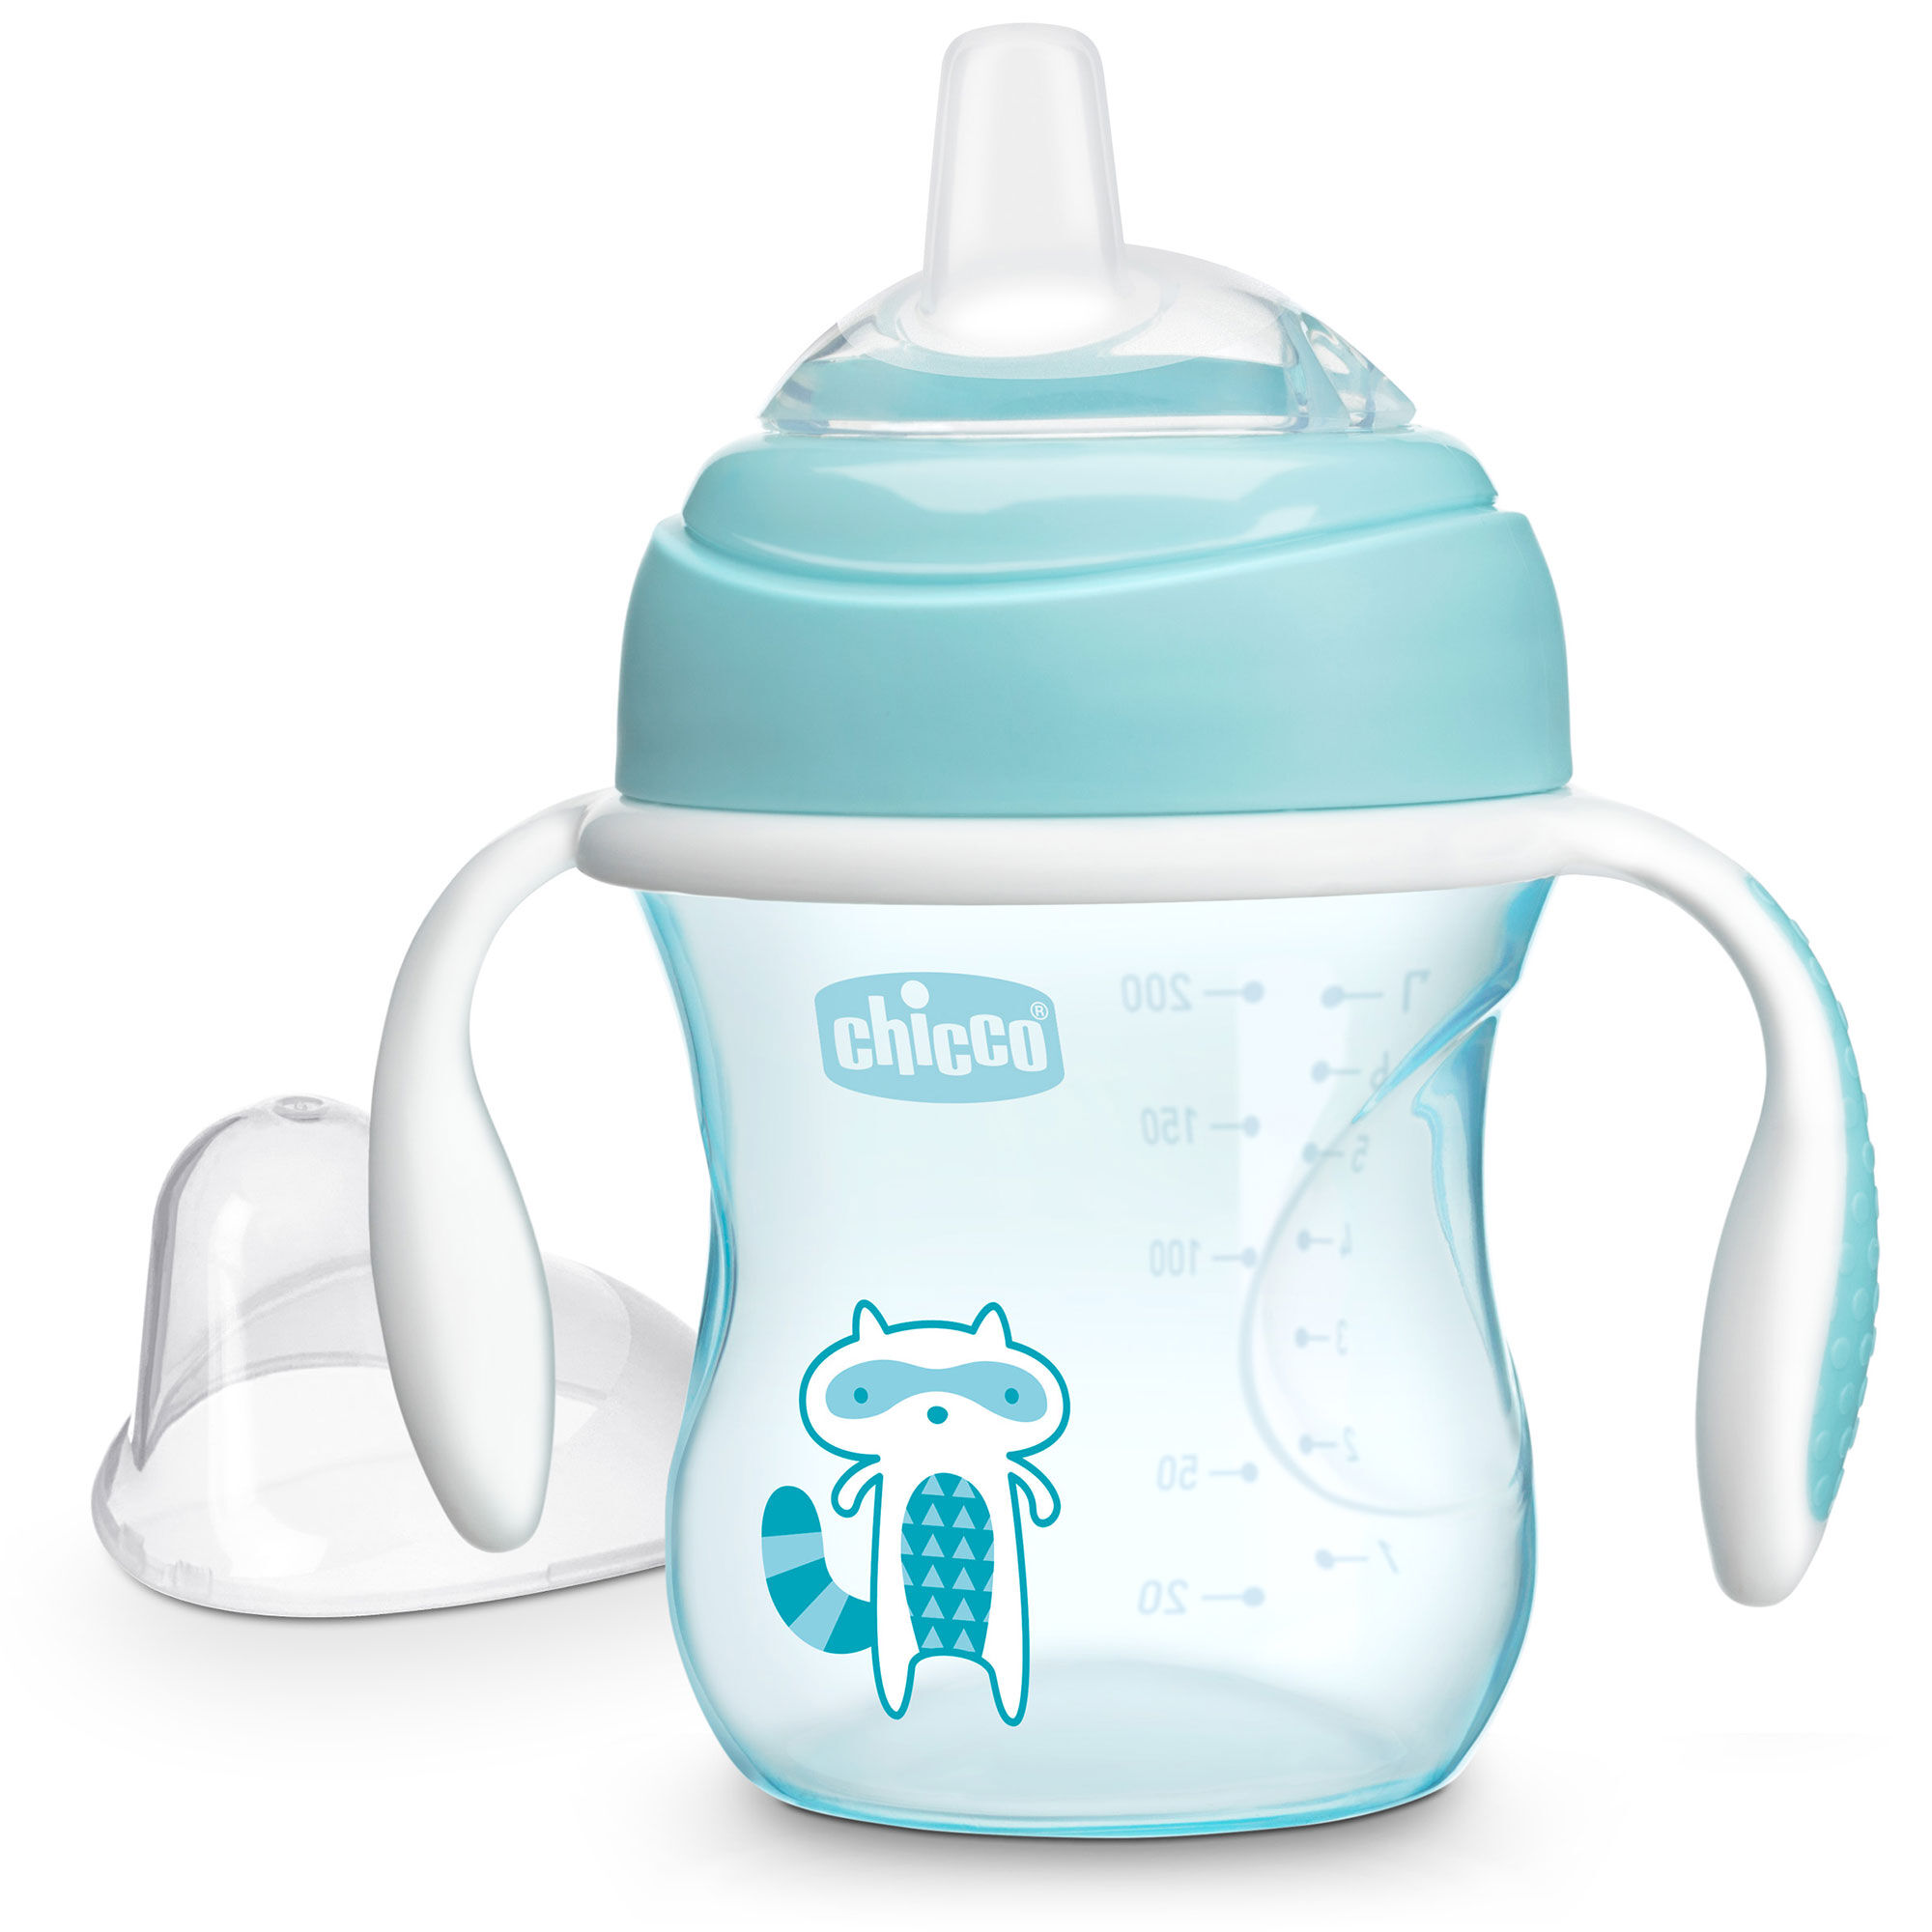 Chicco Silicone Spout Transition Cup